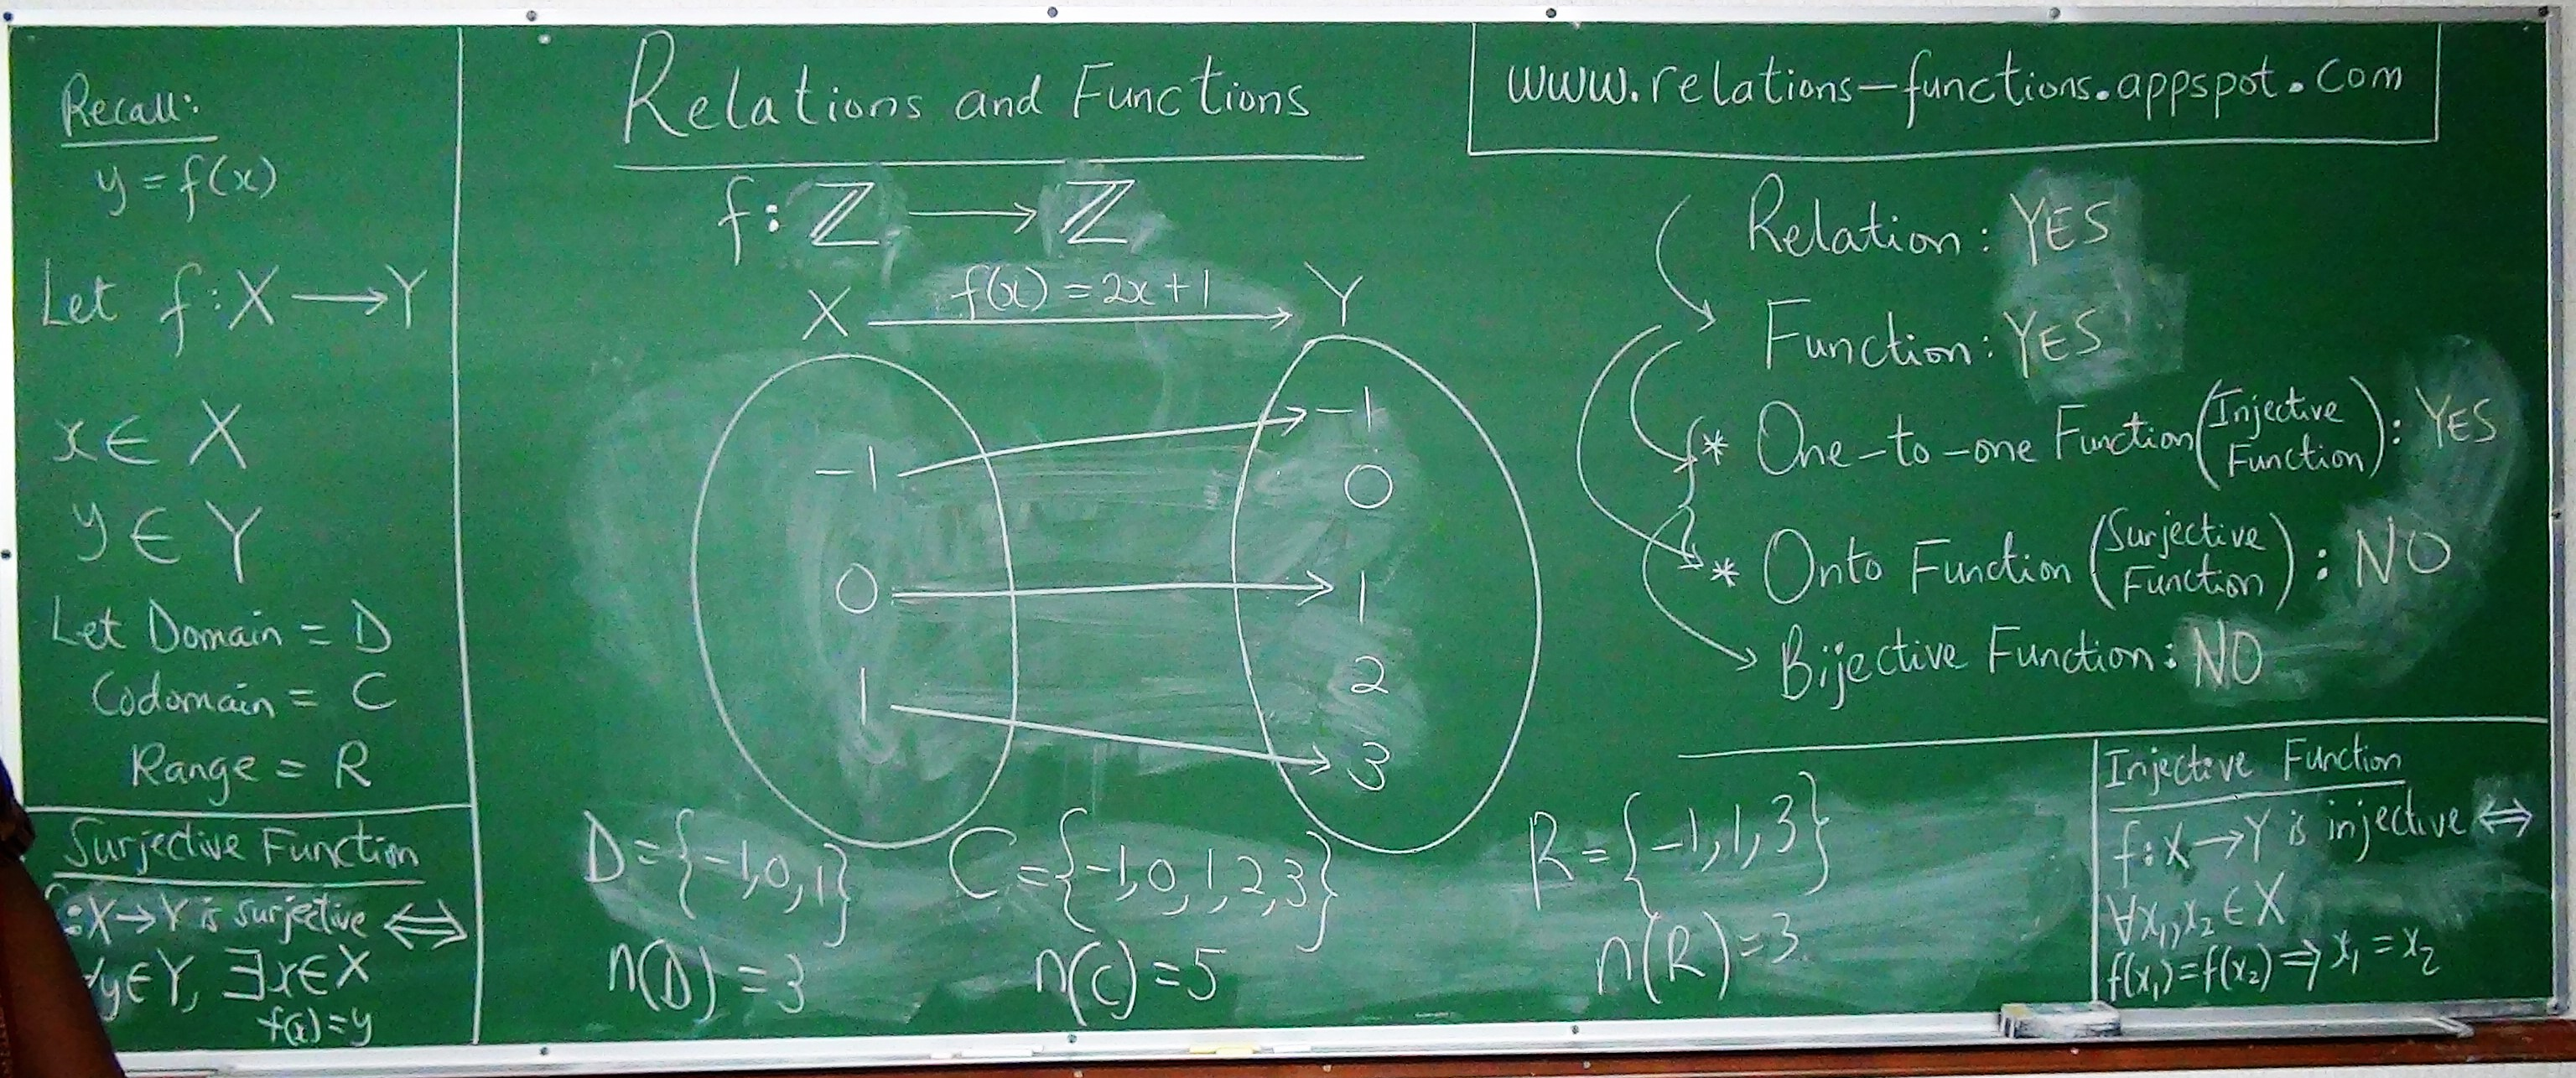 Relations and Functions 7